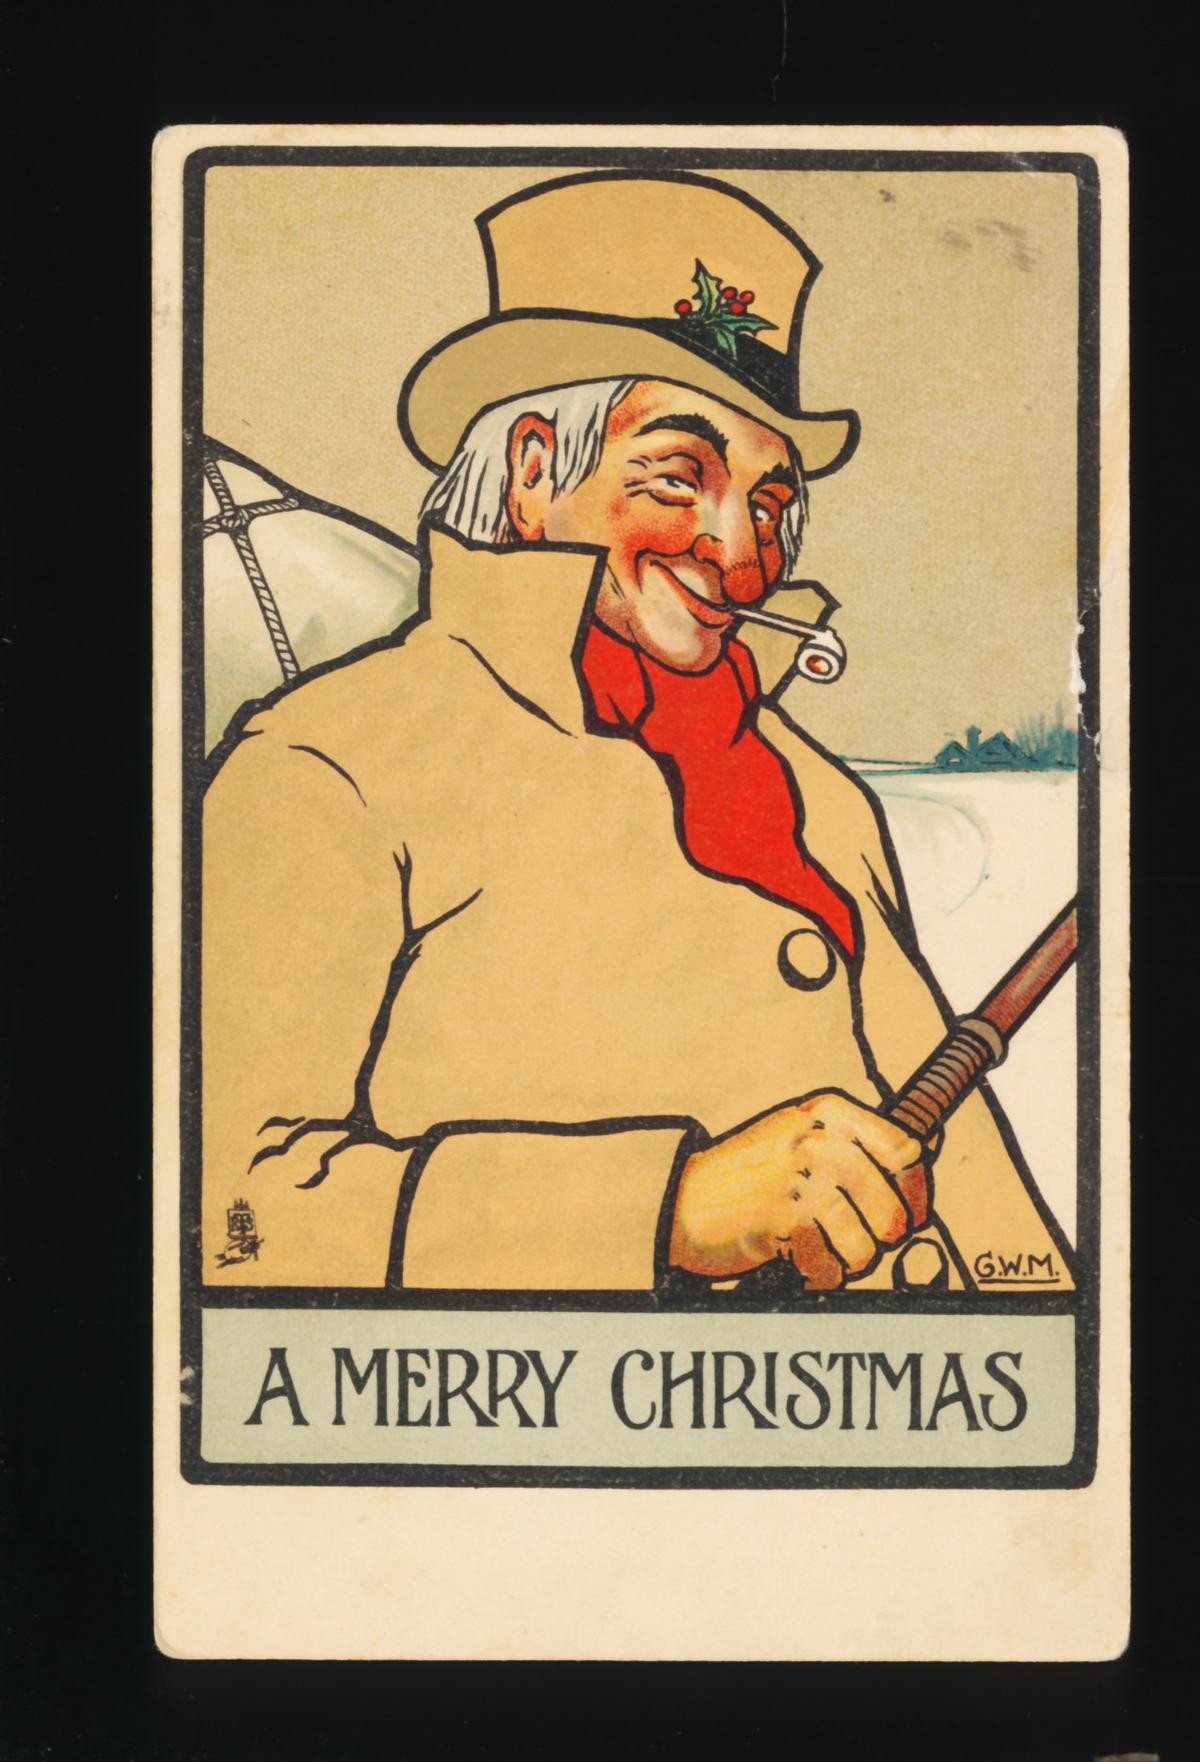 1901 A MERRY CHRISTMAS: with Well-Dressed Gent in Sleigh Seat with red chee